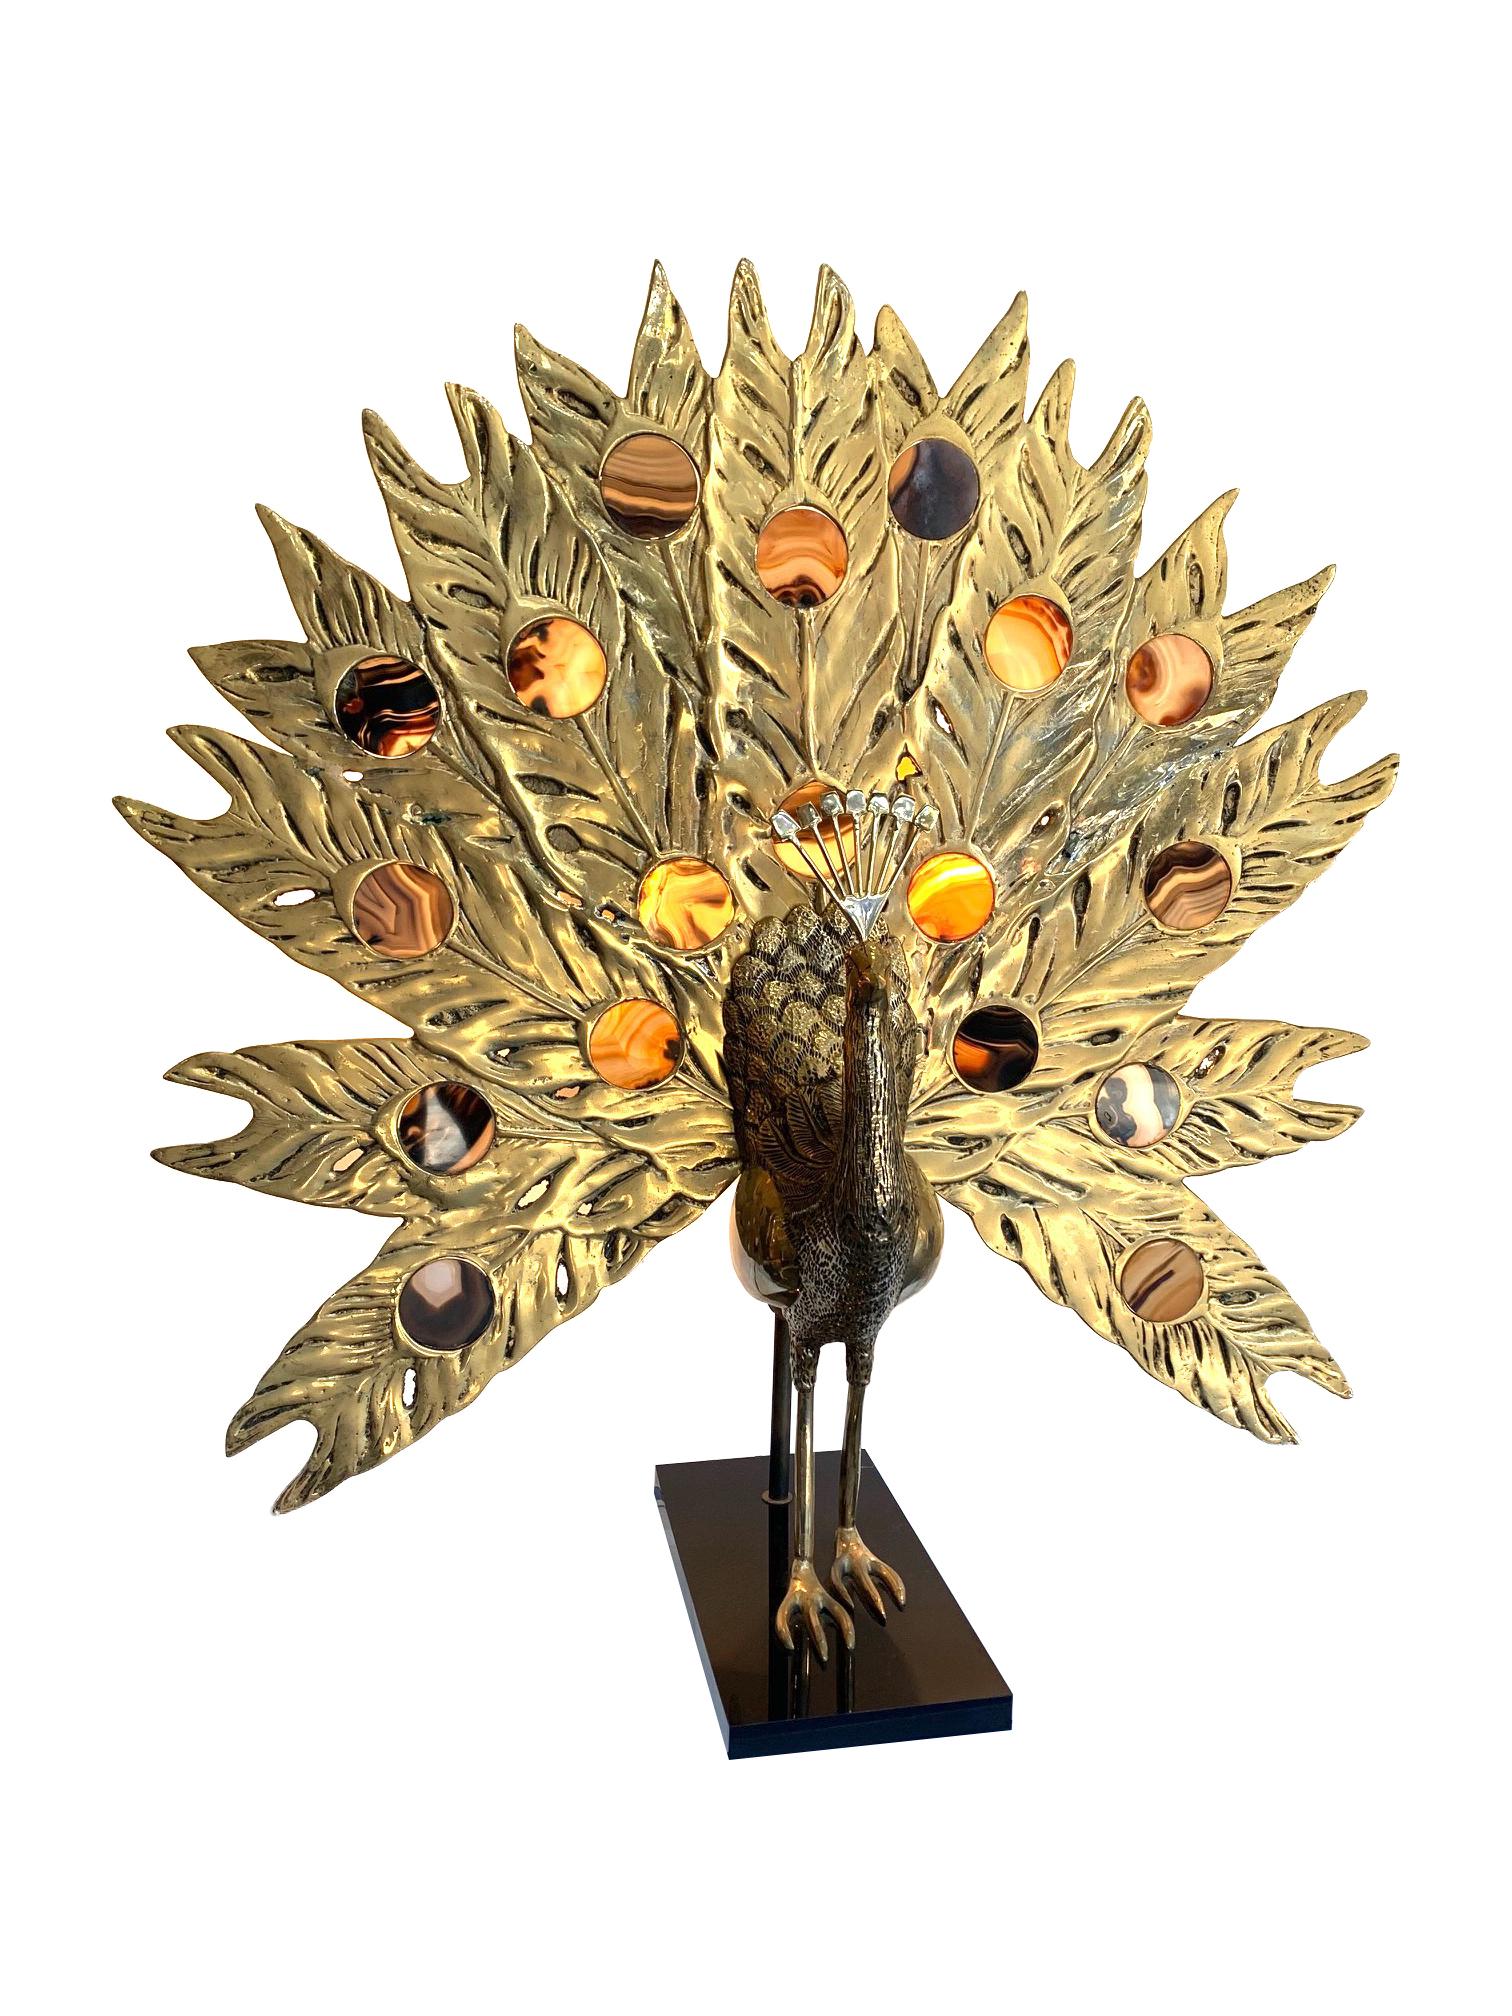 A stunning rare 1970s large brass Peacock lamp with backlit agate tail feathers by Fondica France. The tail feathers are backlit with a two bulb fitting. This piece came from a distributor for Fondica and this was part of his stock, so was never